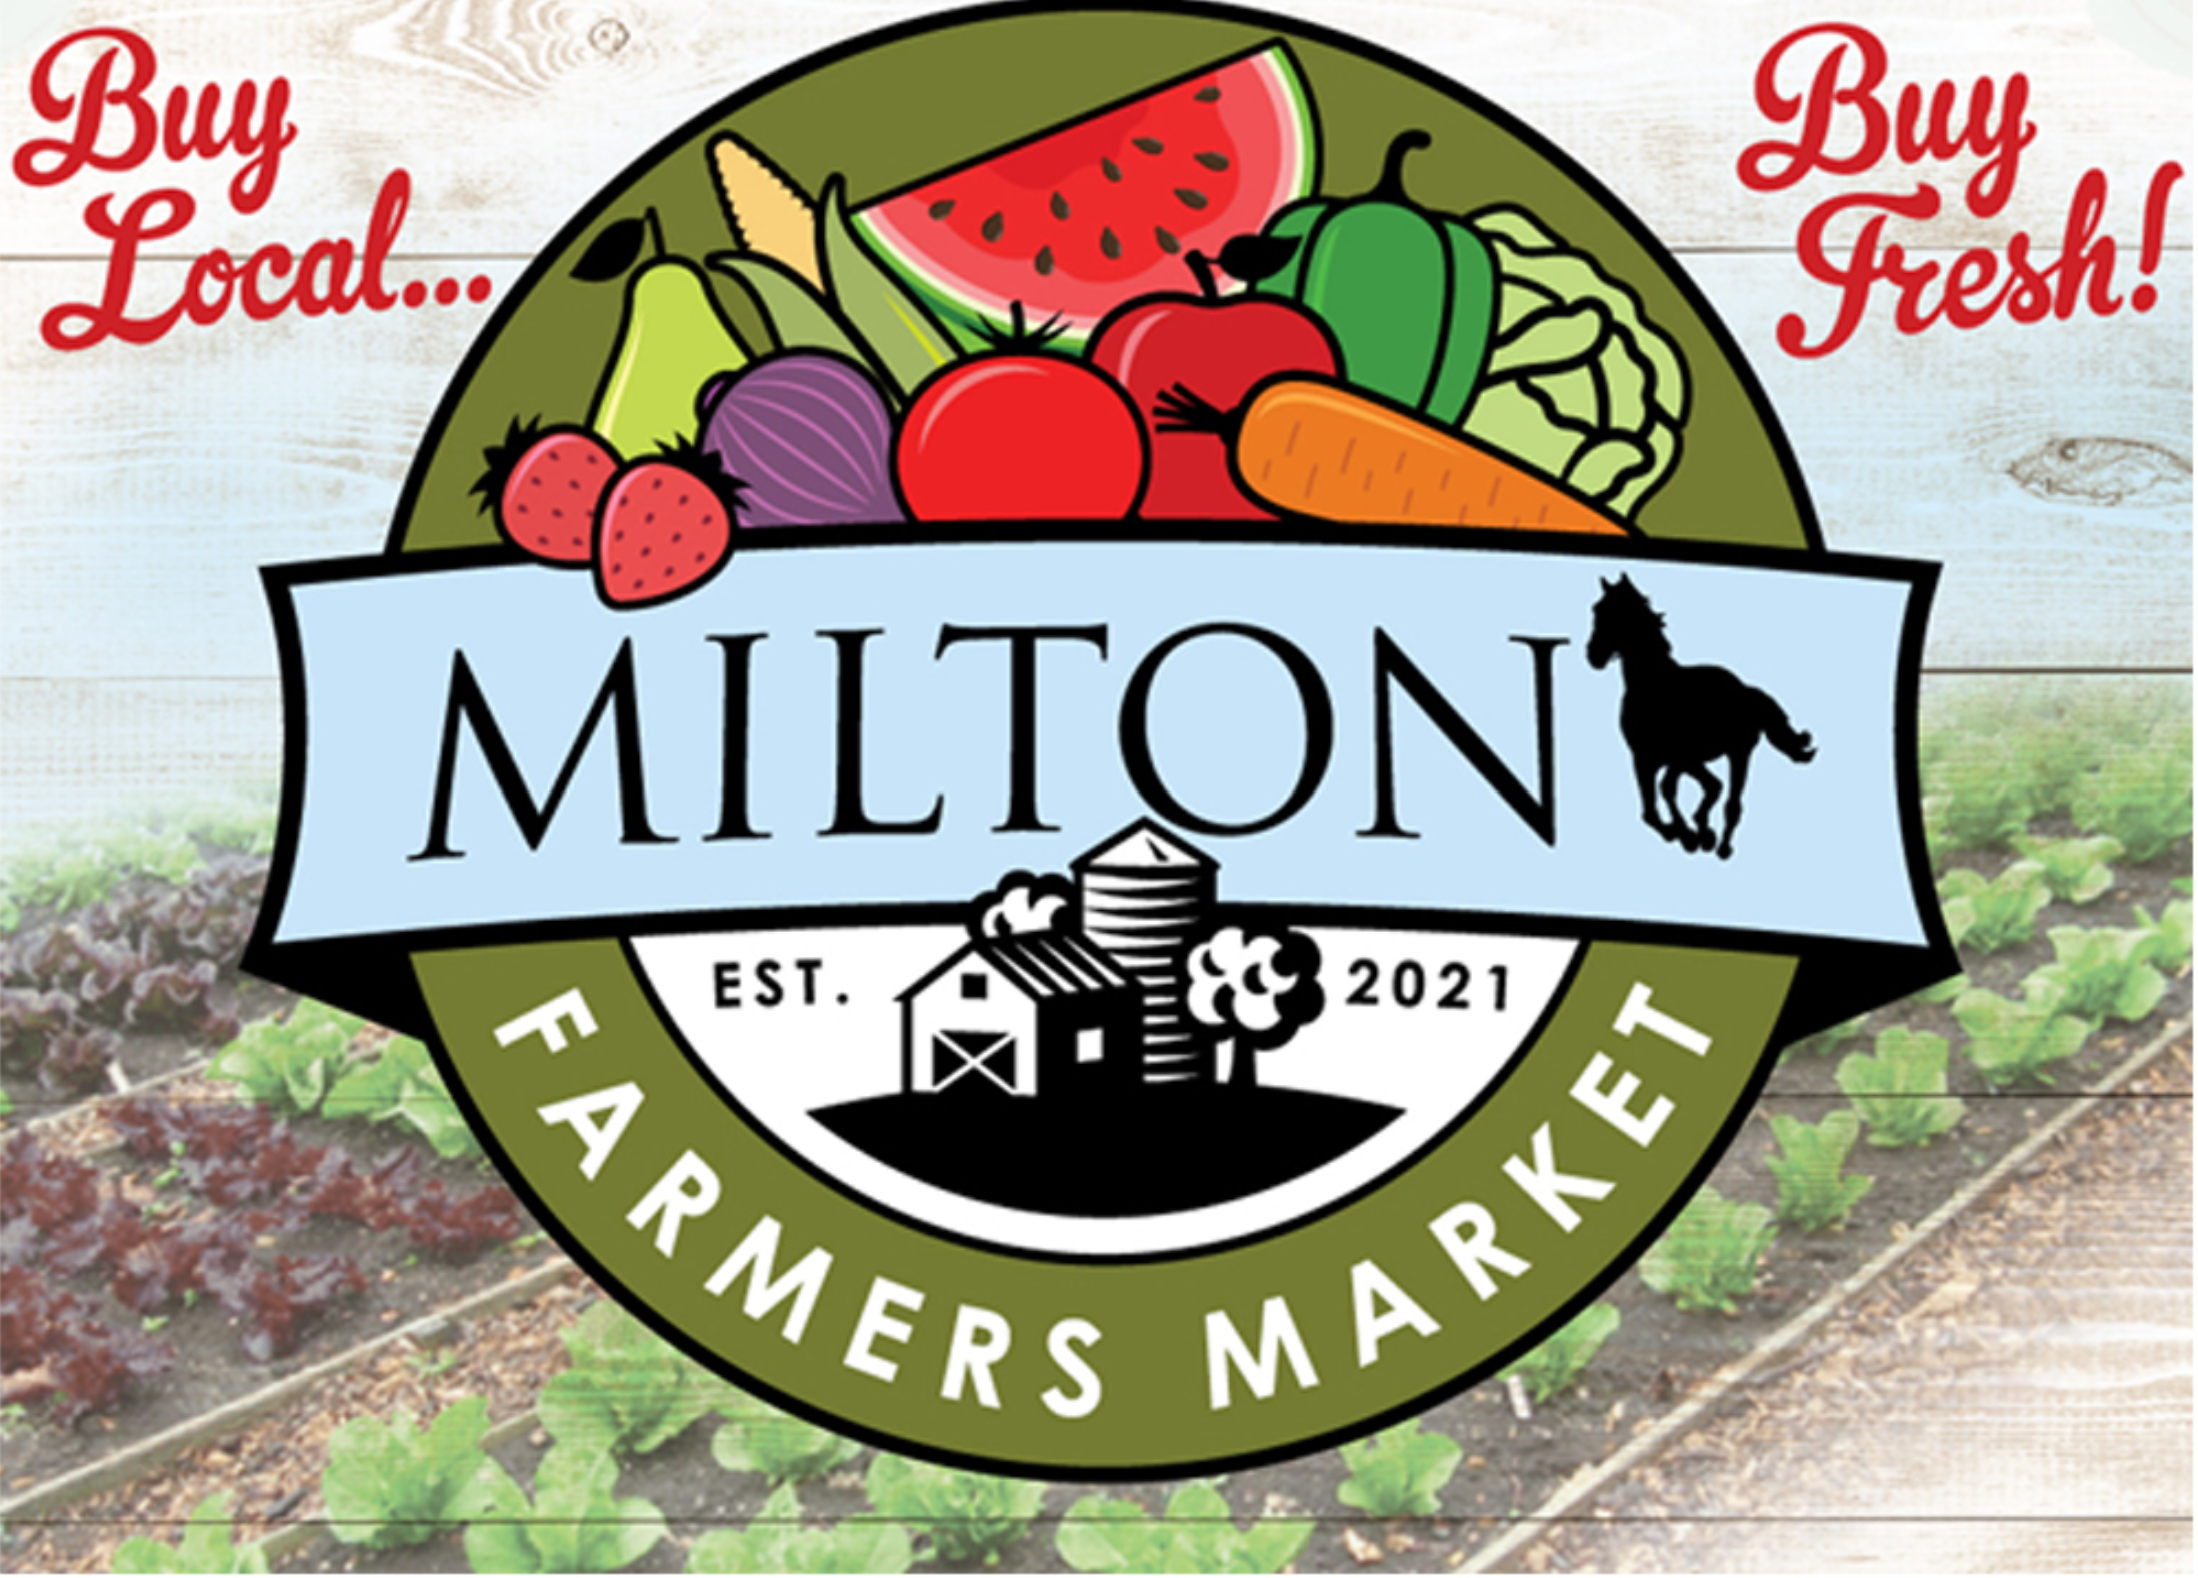 Find us at the Milton Farmers Market